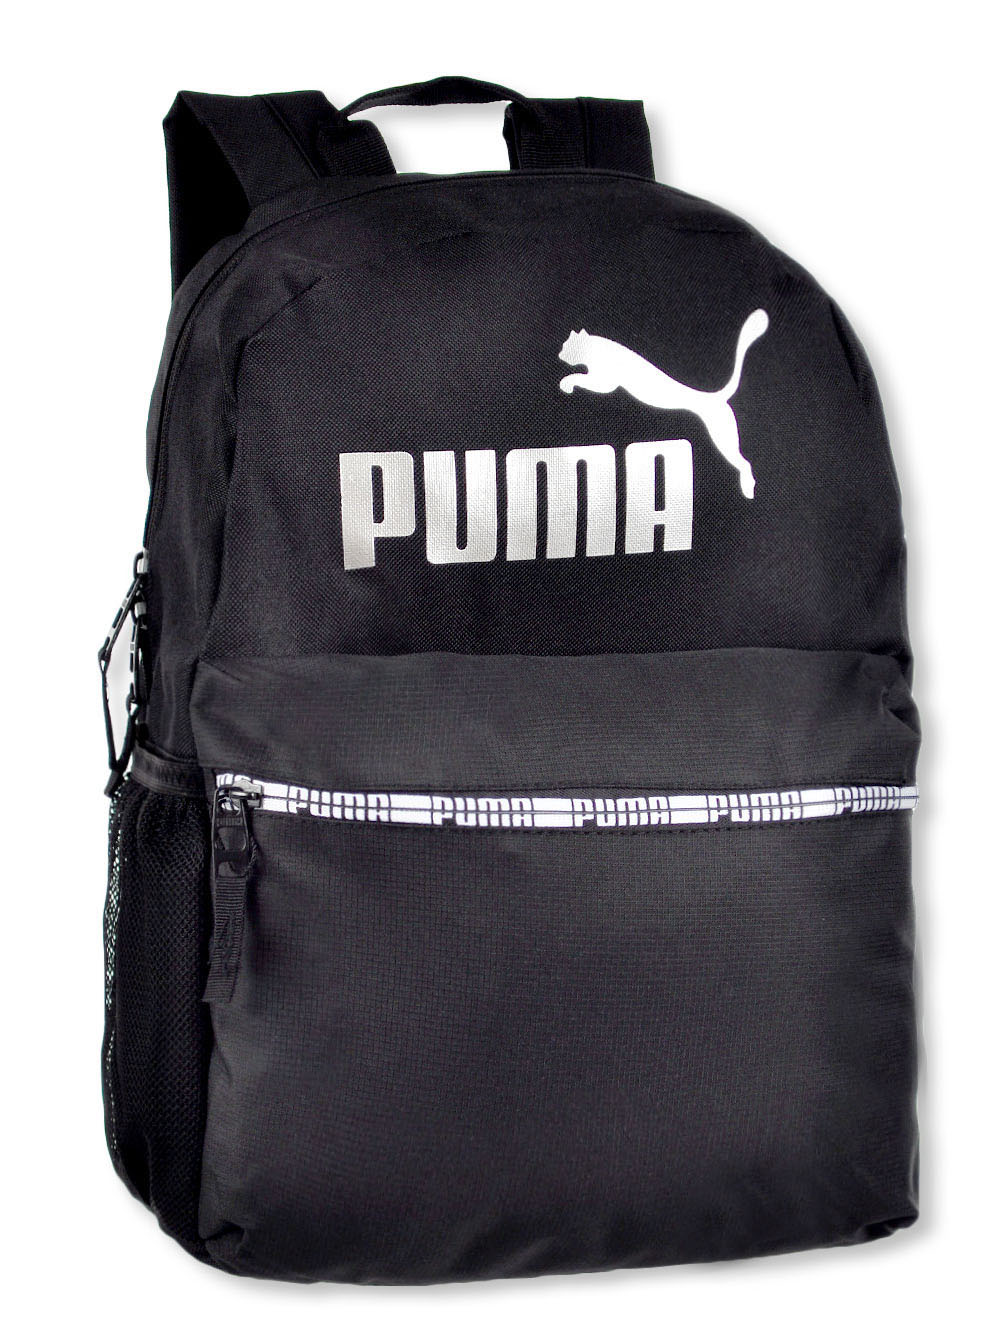 Boys Black and Multicolor Backpacks